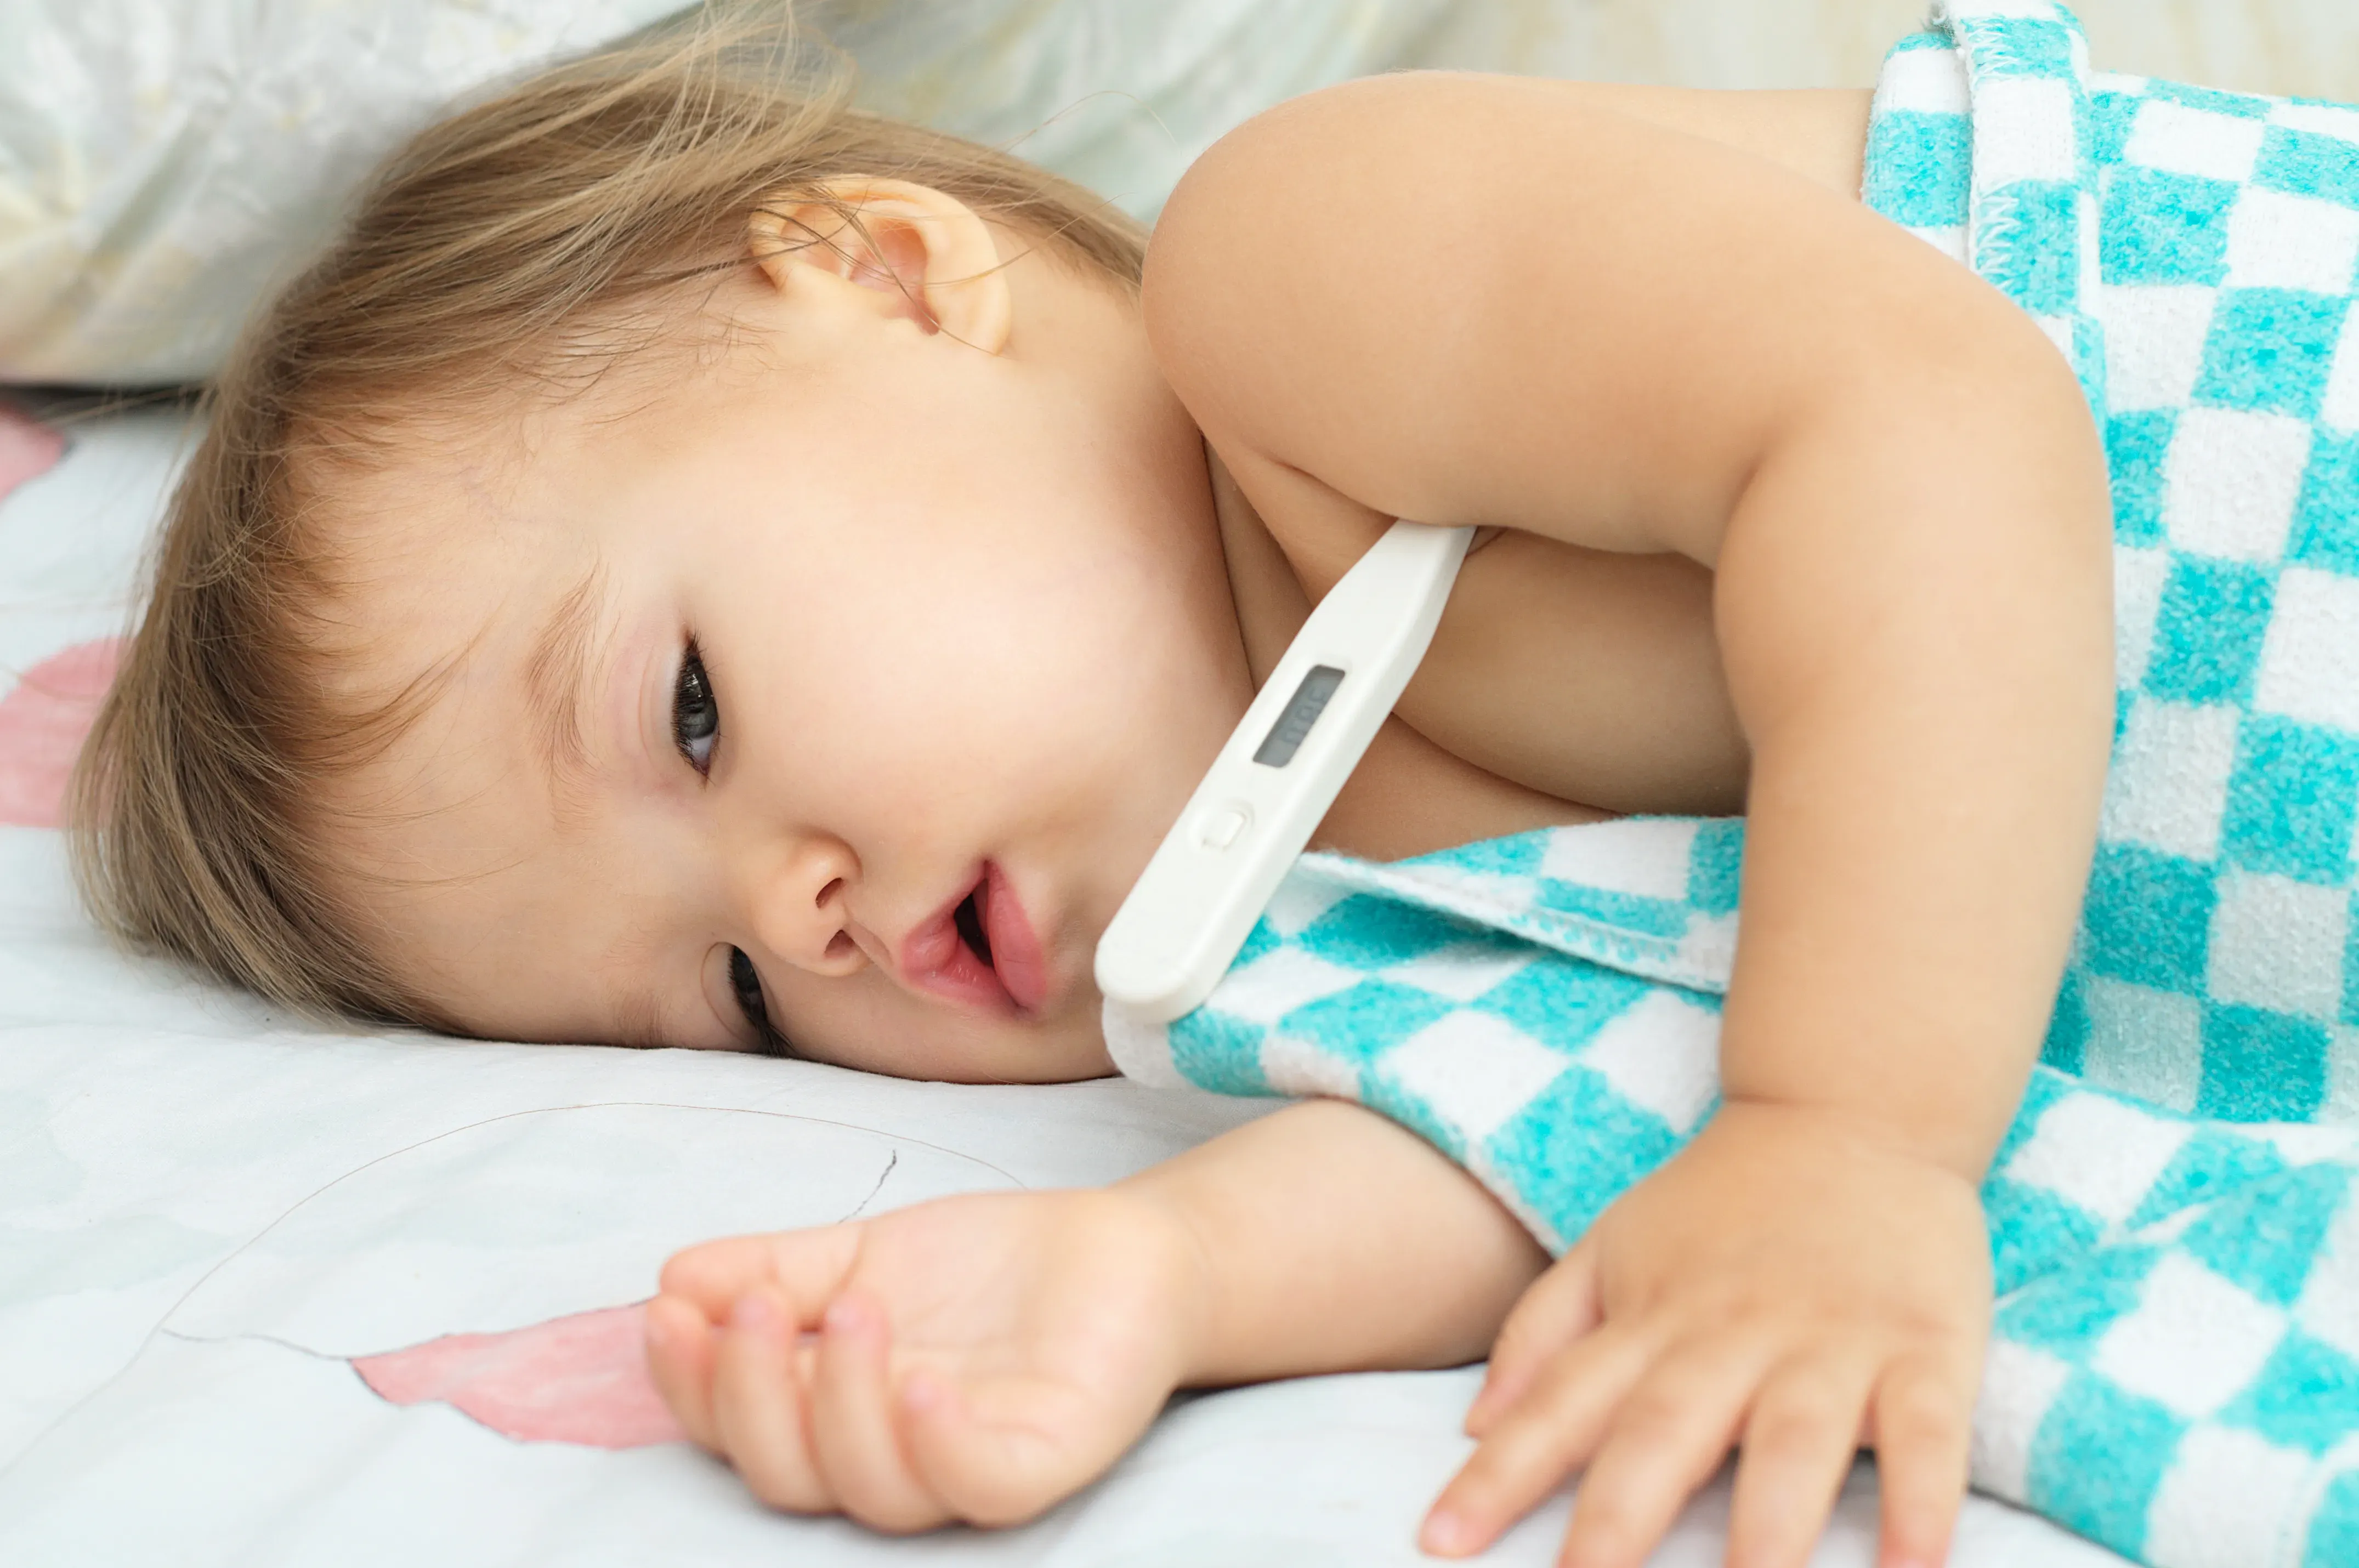 Fever In Babies/Toddlers: Important Things Every Parent Should Know